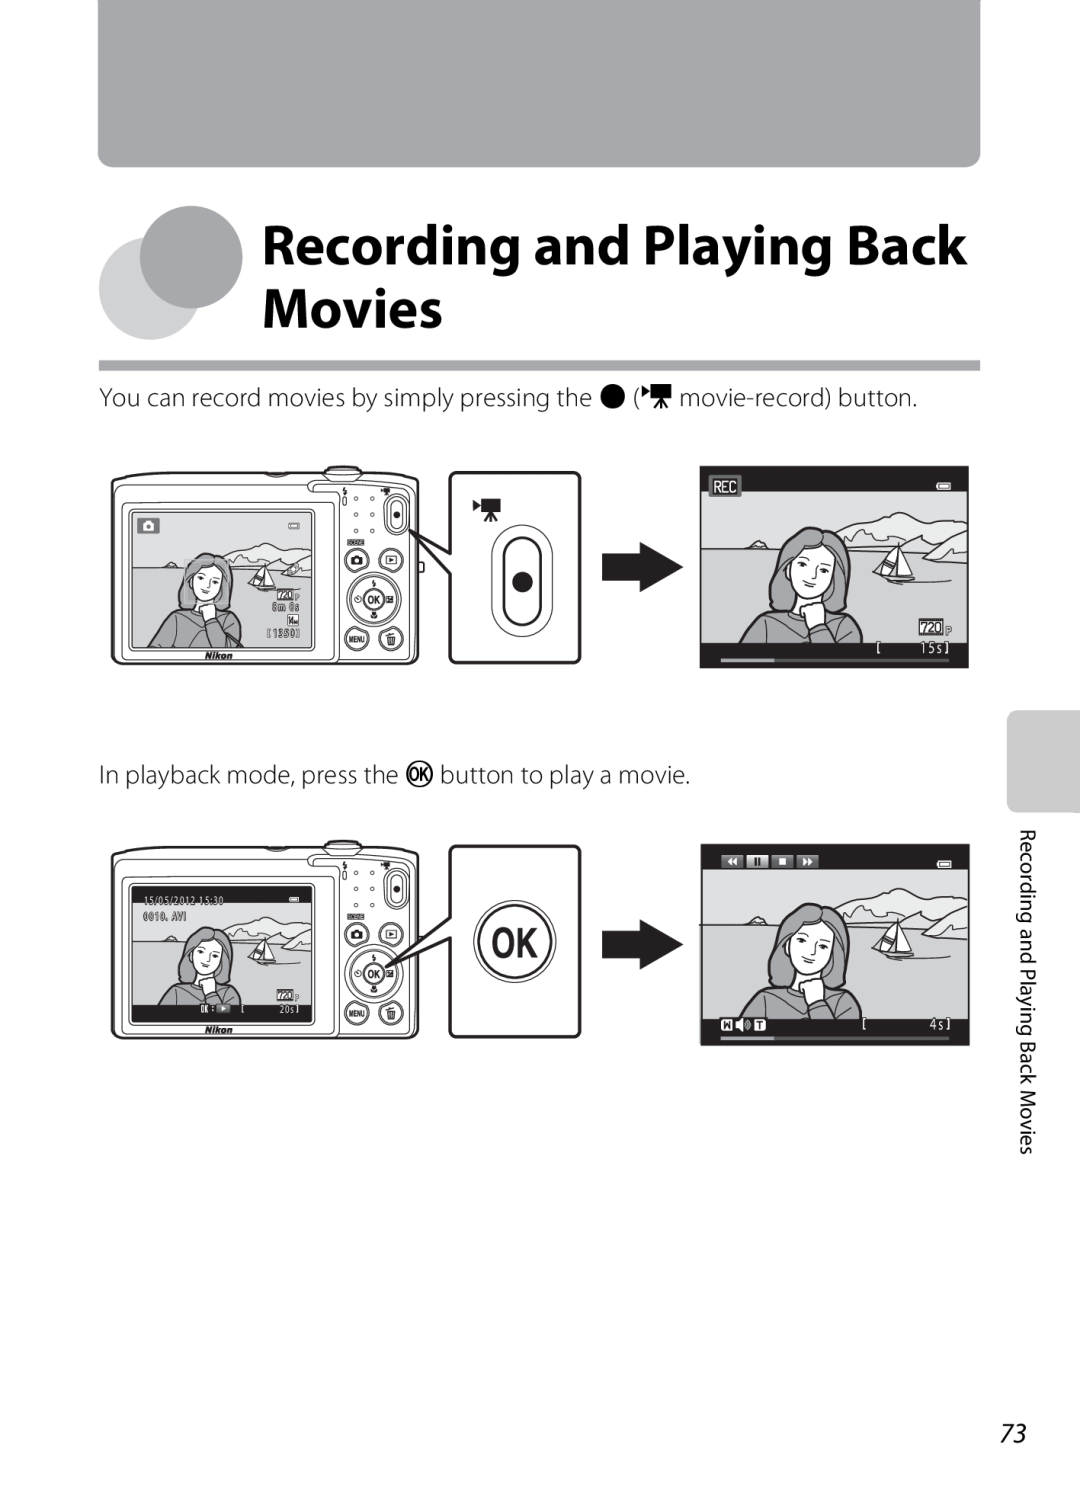 Nikon S2600 Recording and Playing Back Movies, You can record movies by simply pressing the b e movie-record button, 1 5 s 